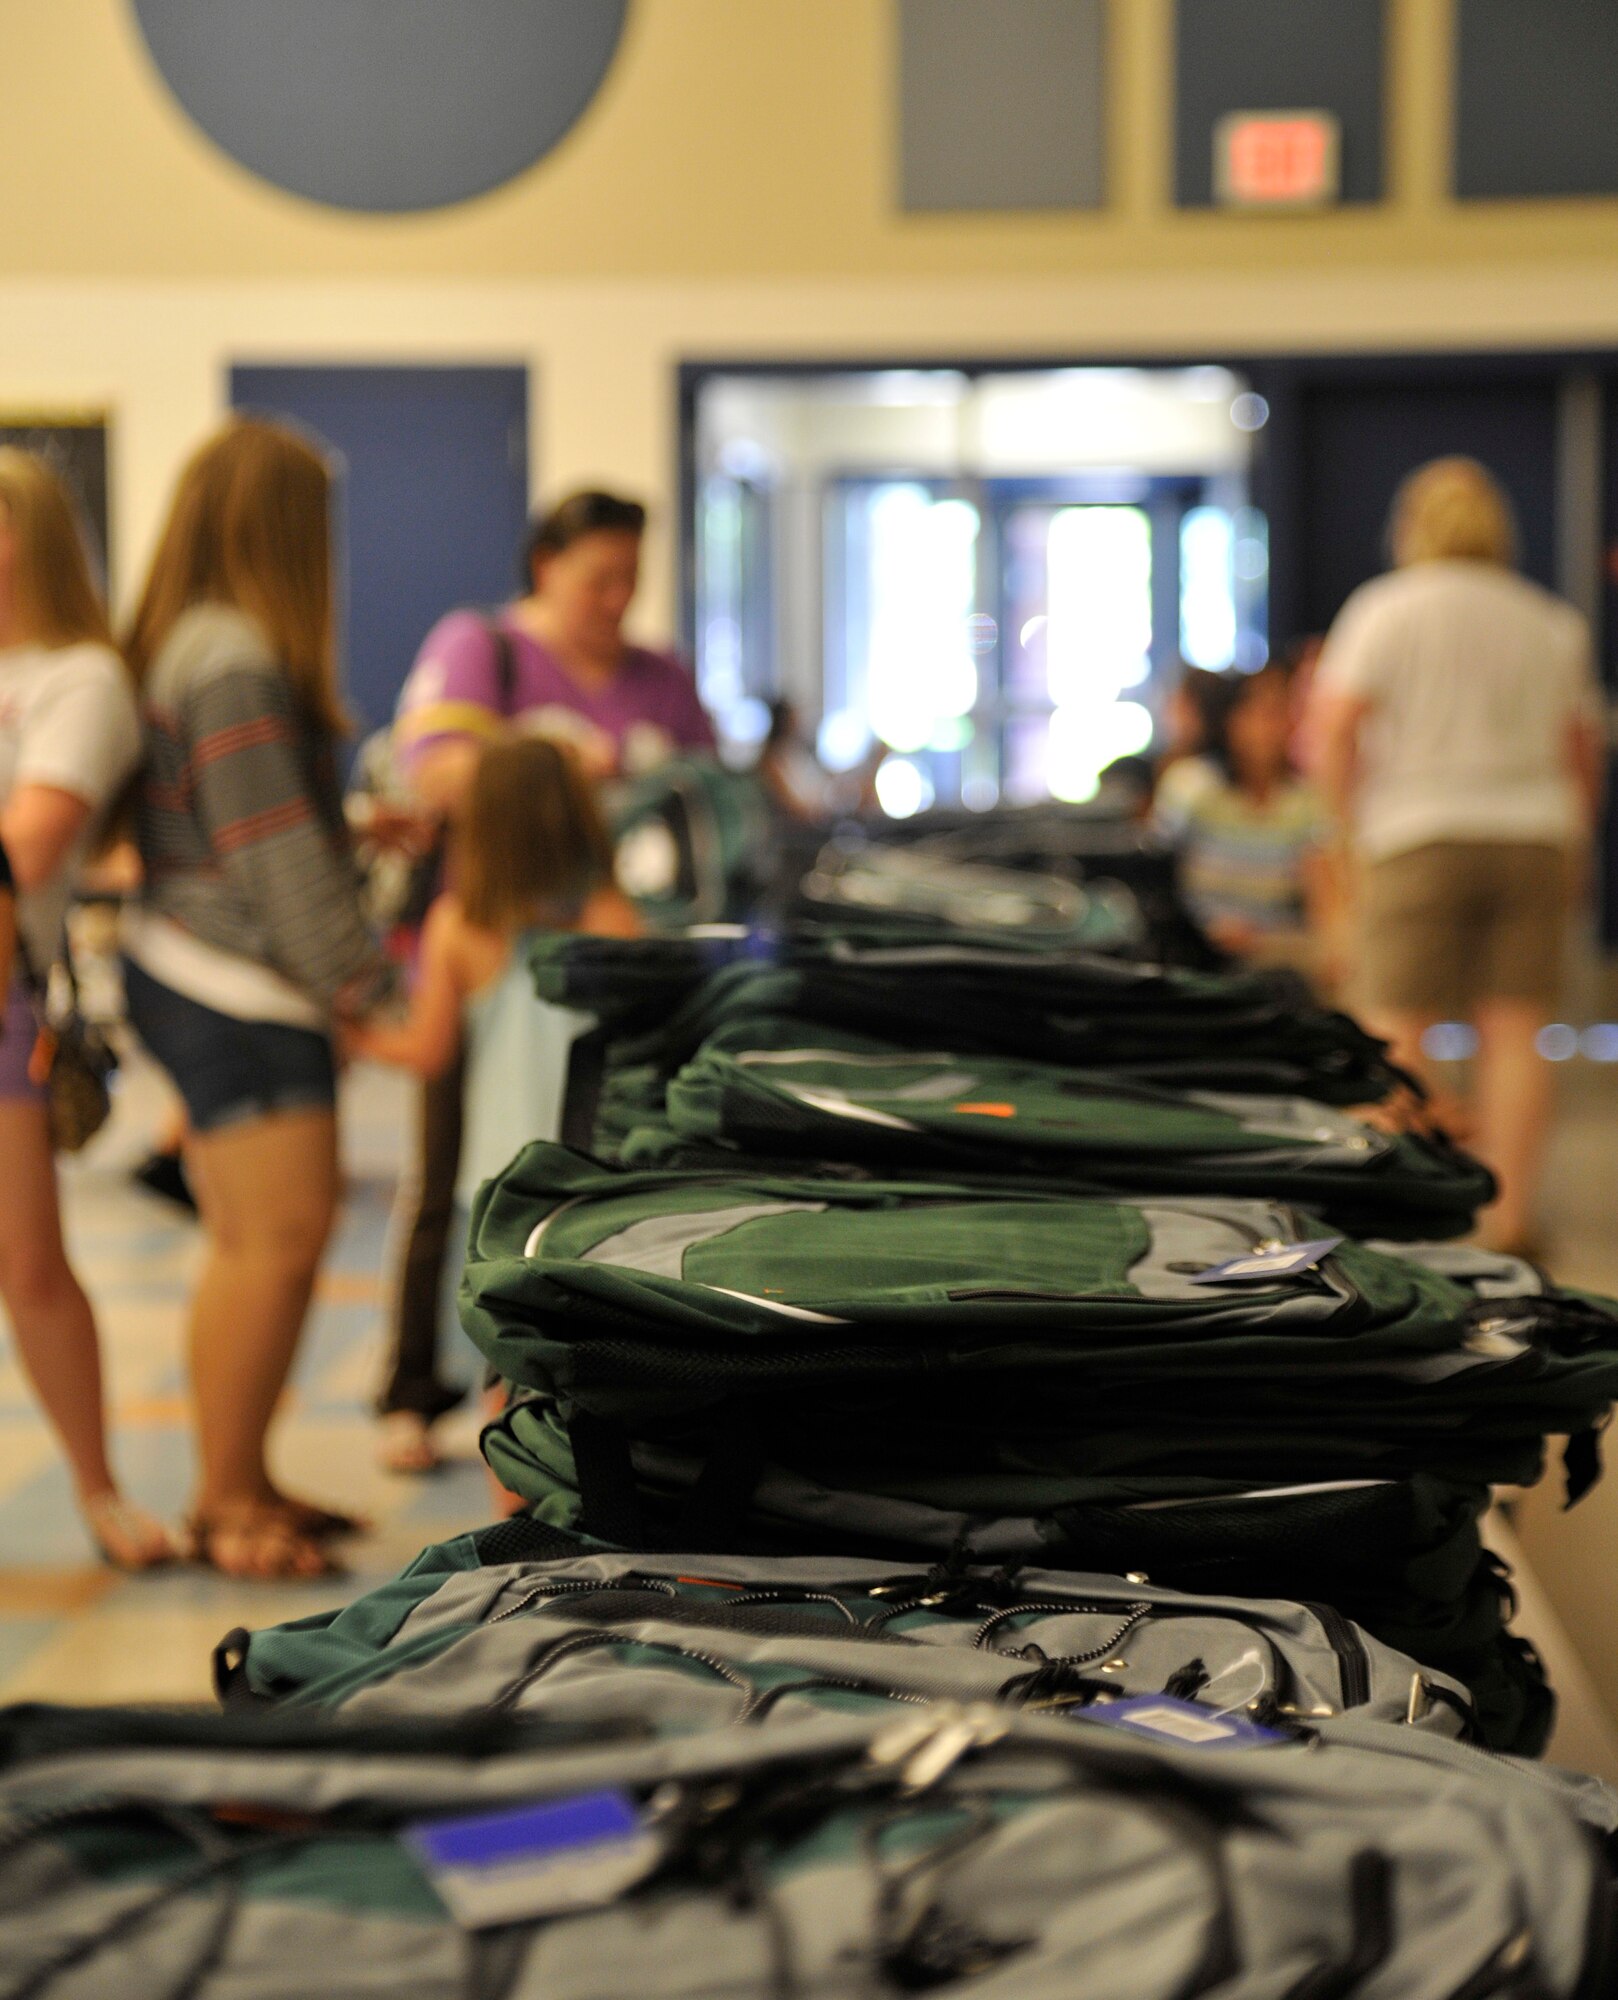 Family members of Team Fairchild pick out book bags during Operation Homefront’s Back-to-School Brigade in the Michael Anderson Elementary School gymnasium at Fairchild Air Force Base, Washington, Aug. 7, 2014. Operation Homefront was formed in 2002 and since then has used 128 million dollars to help military families. (U.S. Air Force photo by Senior Airman Ryan Zeski/Released)